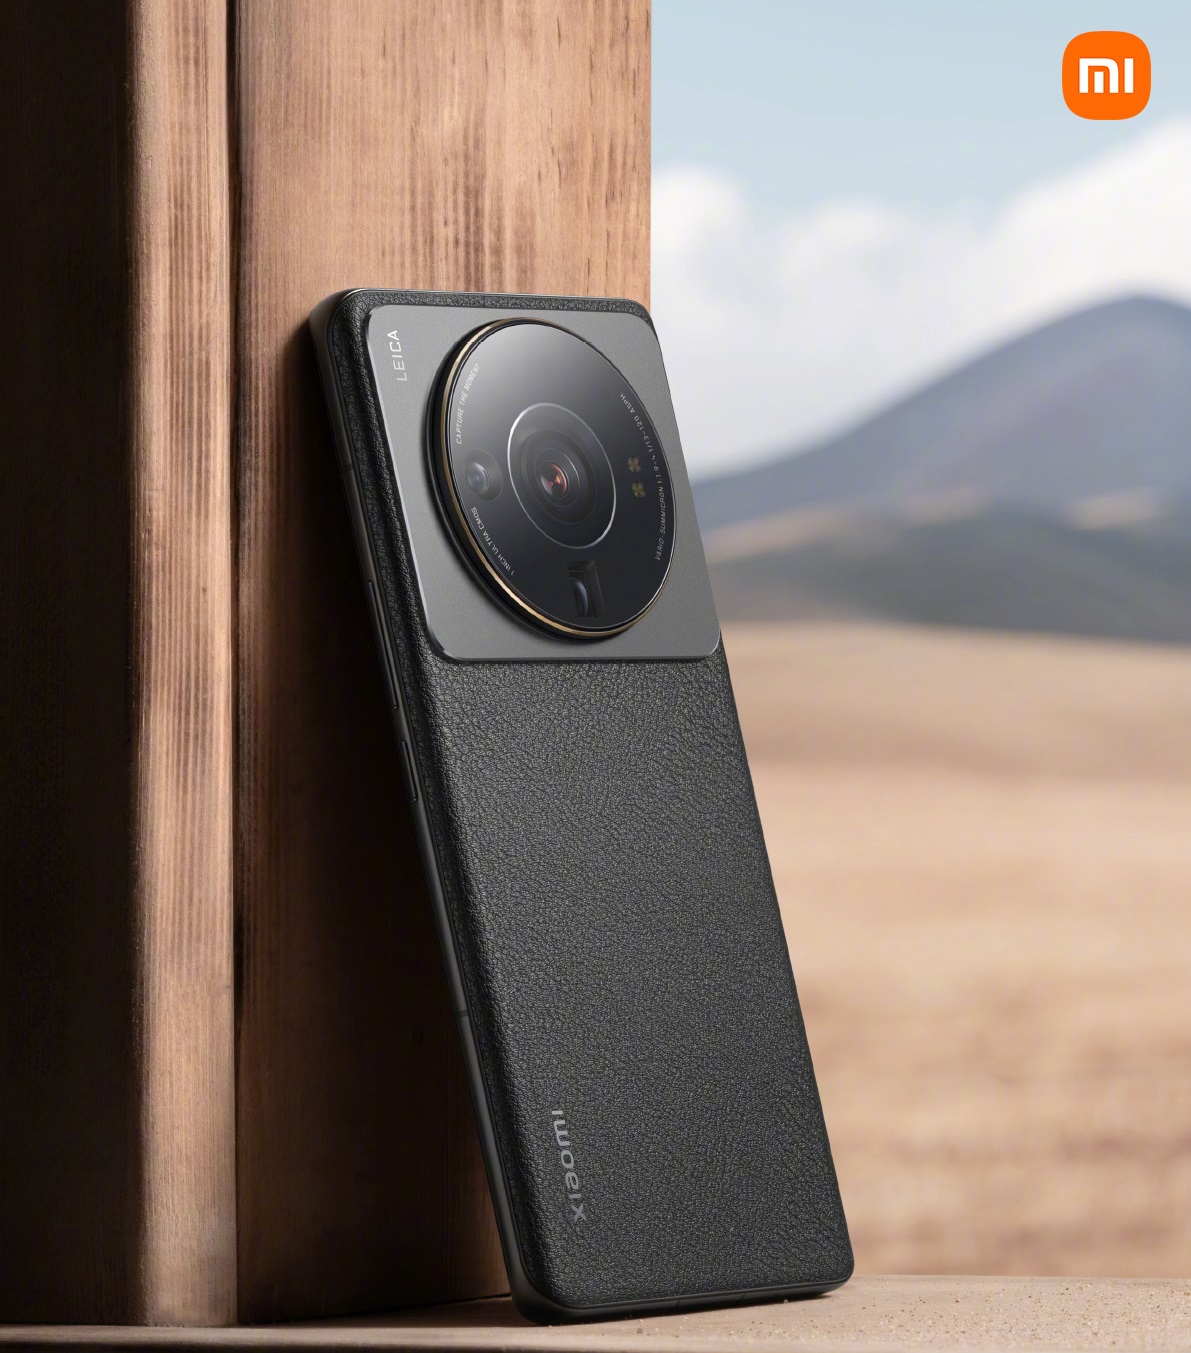 Xiaomi 12S Ultra Concept - Is This The Future of Cameras?